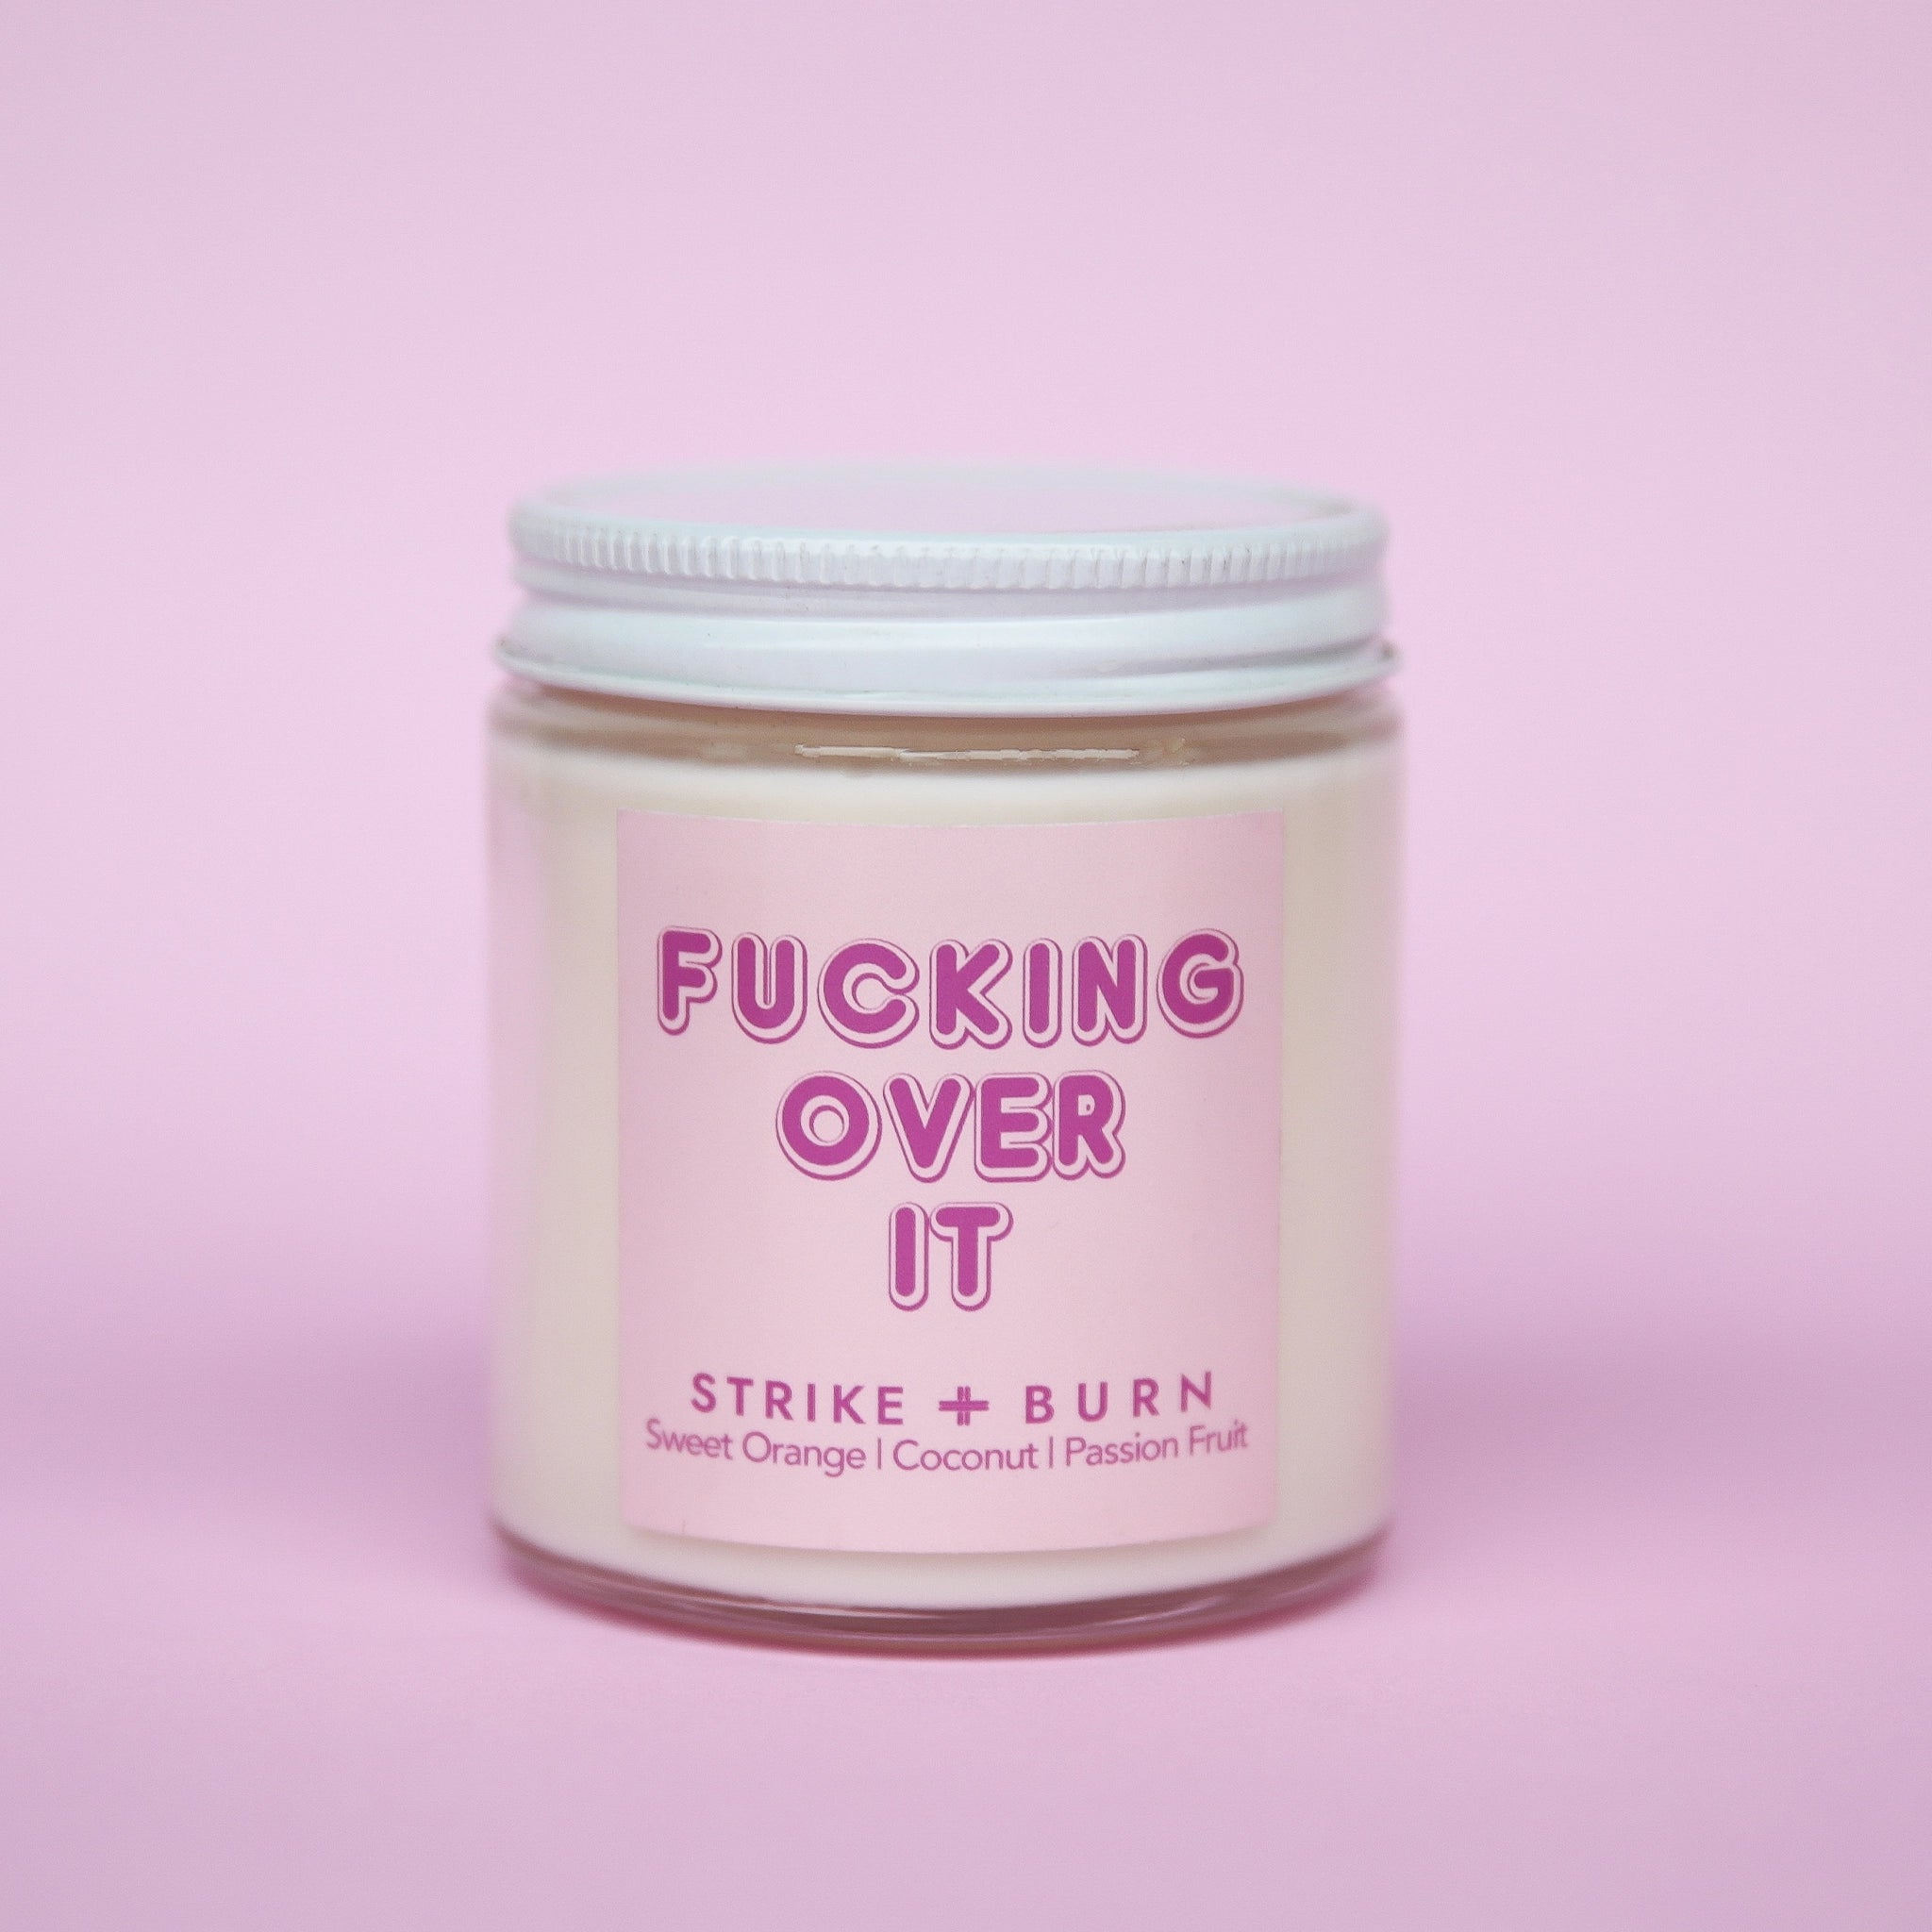 Clear glass jar candle with a white lid off to the side. The label is light pink with font that reads "fucking over it".